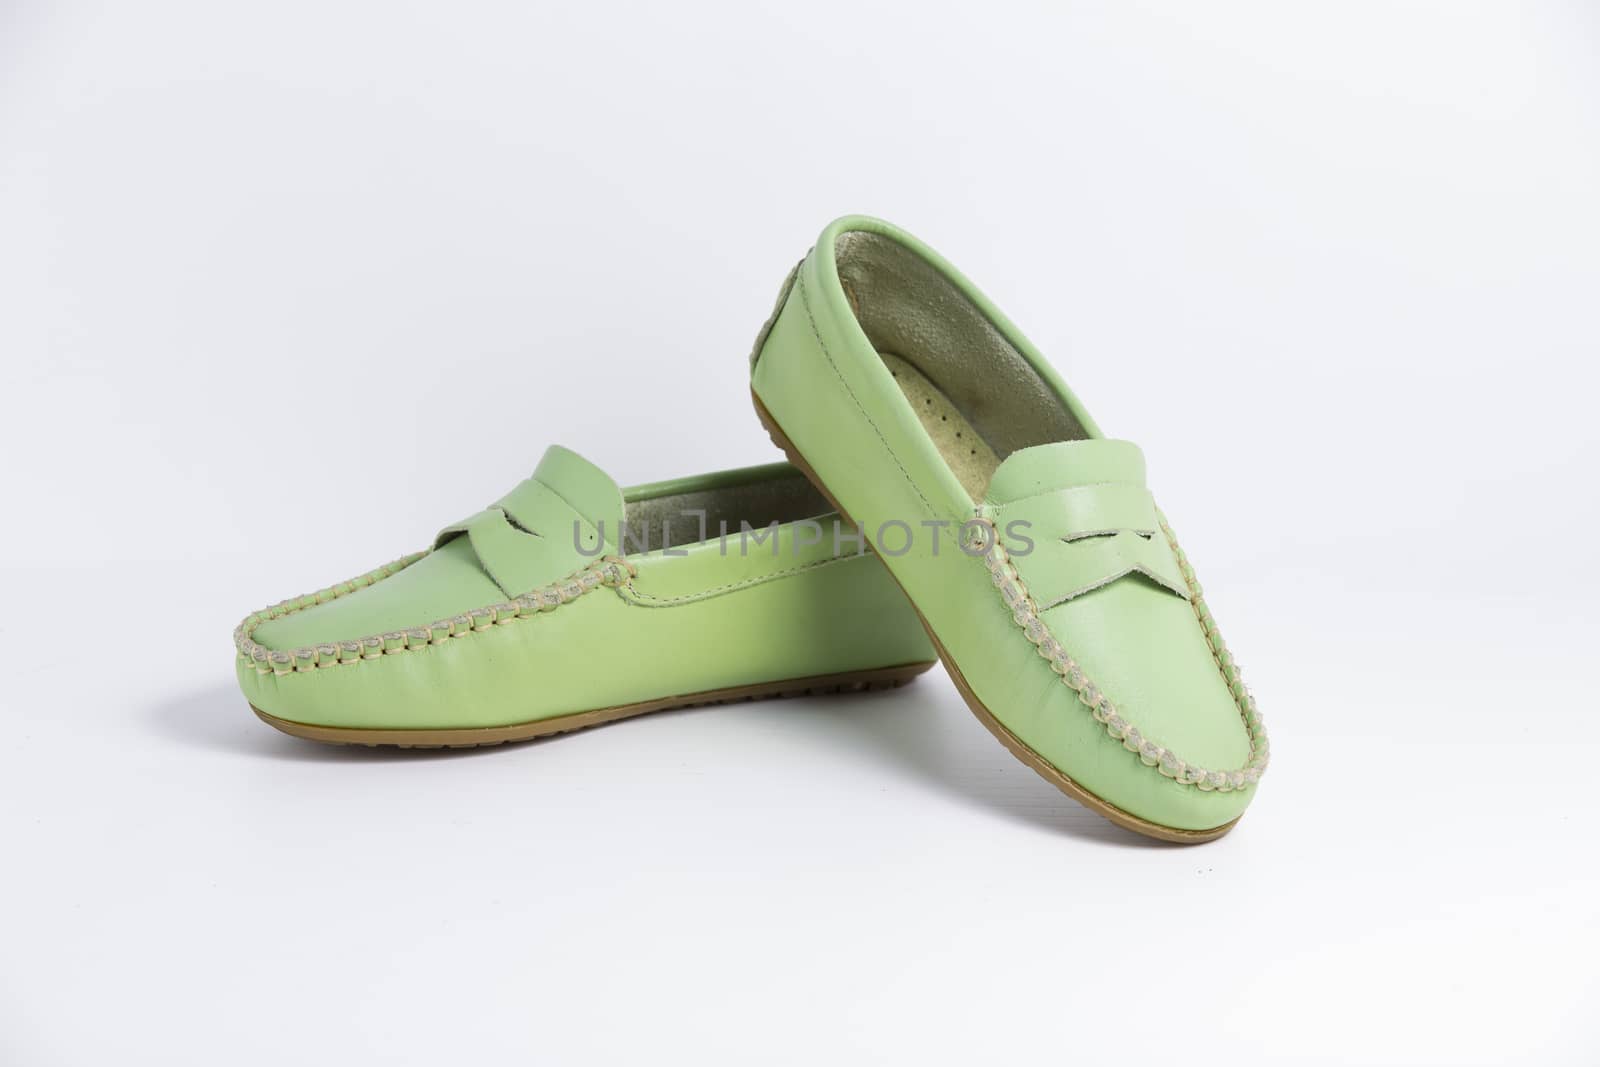 Pair of green leather shoes on white background, isolated product.